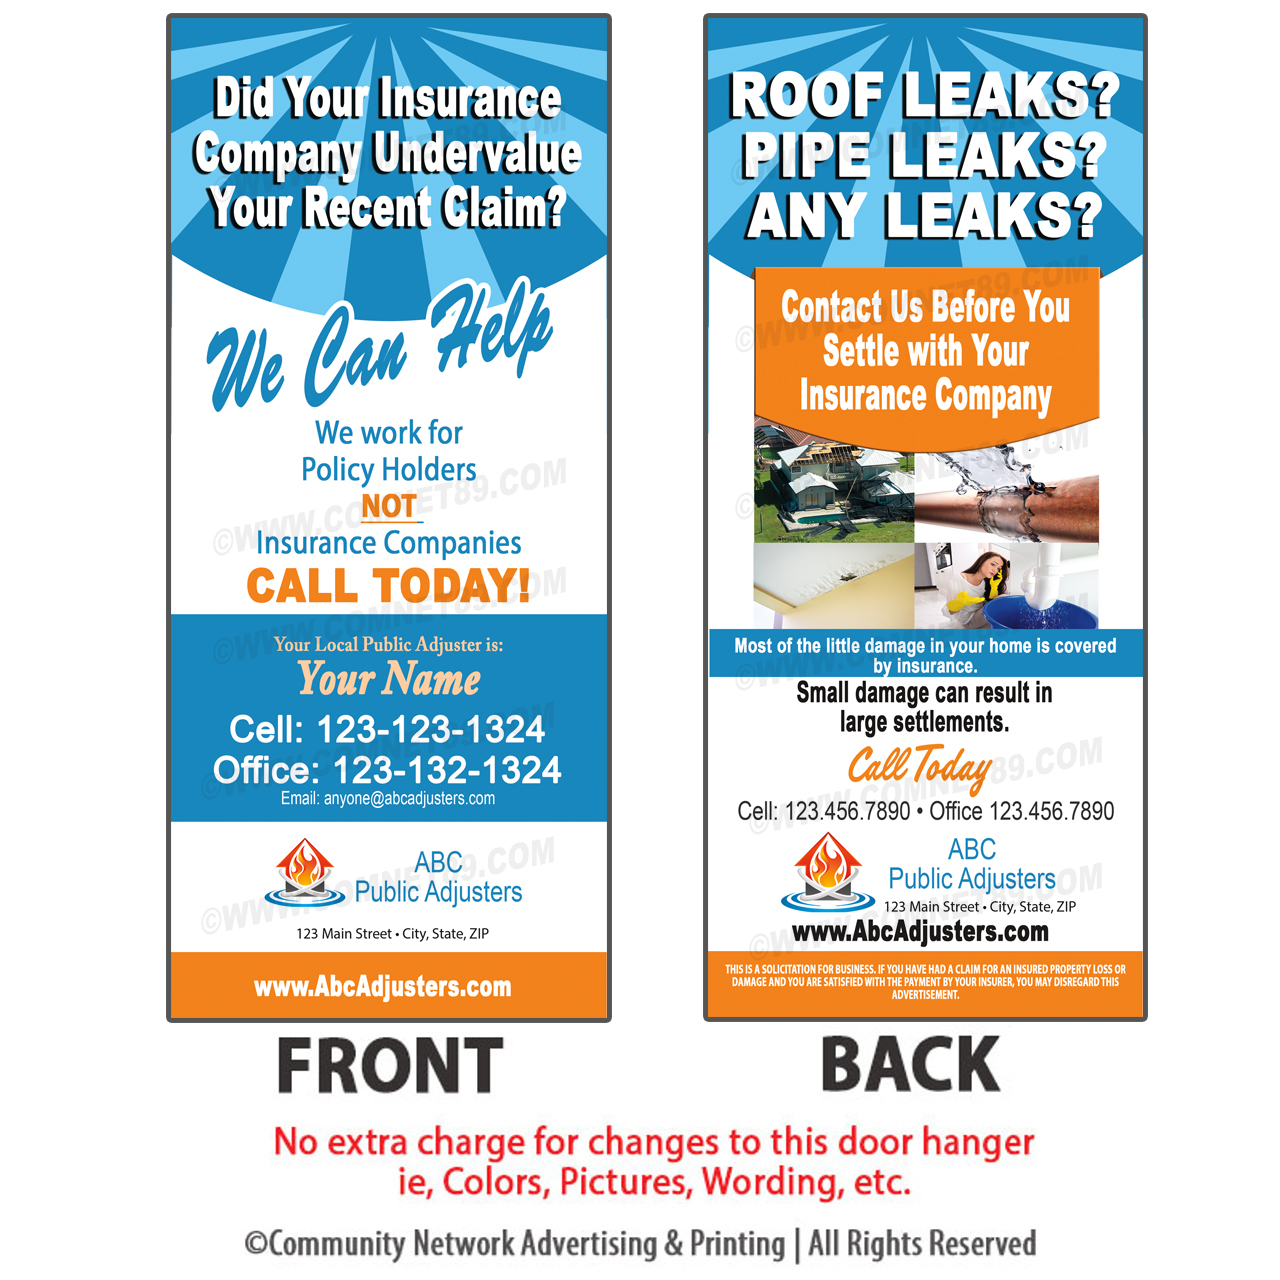 Insurance Adjuster Rack cards are an easy way to connect with property owners after a storm.